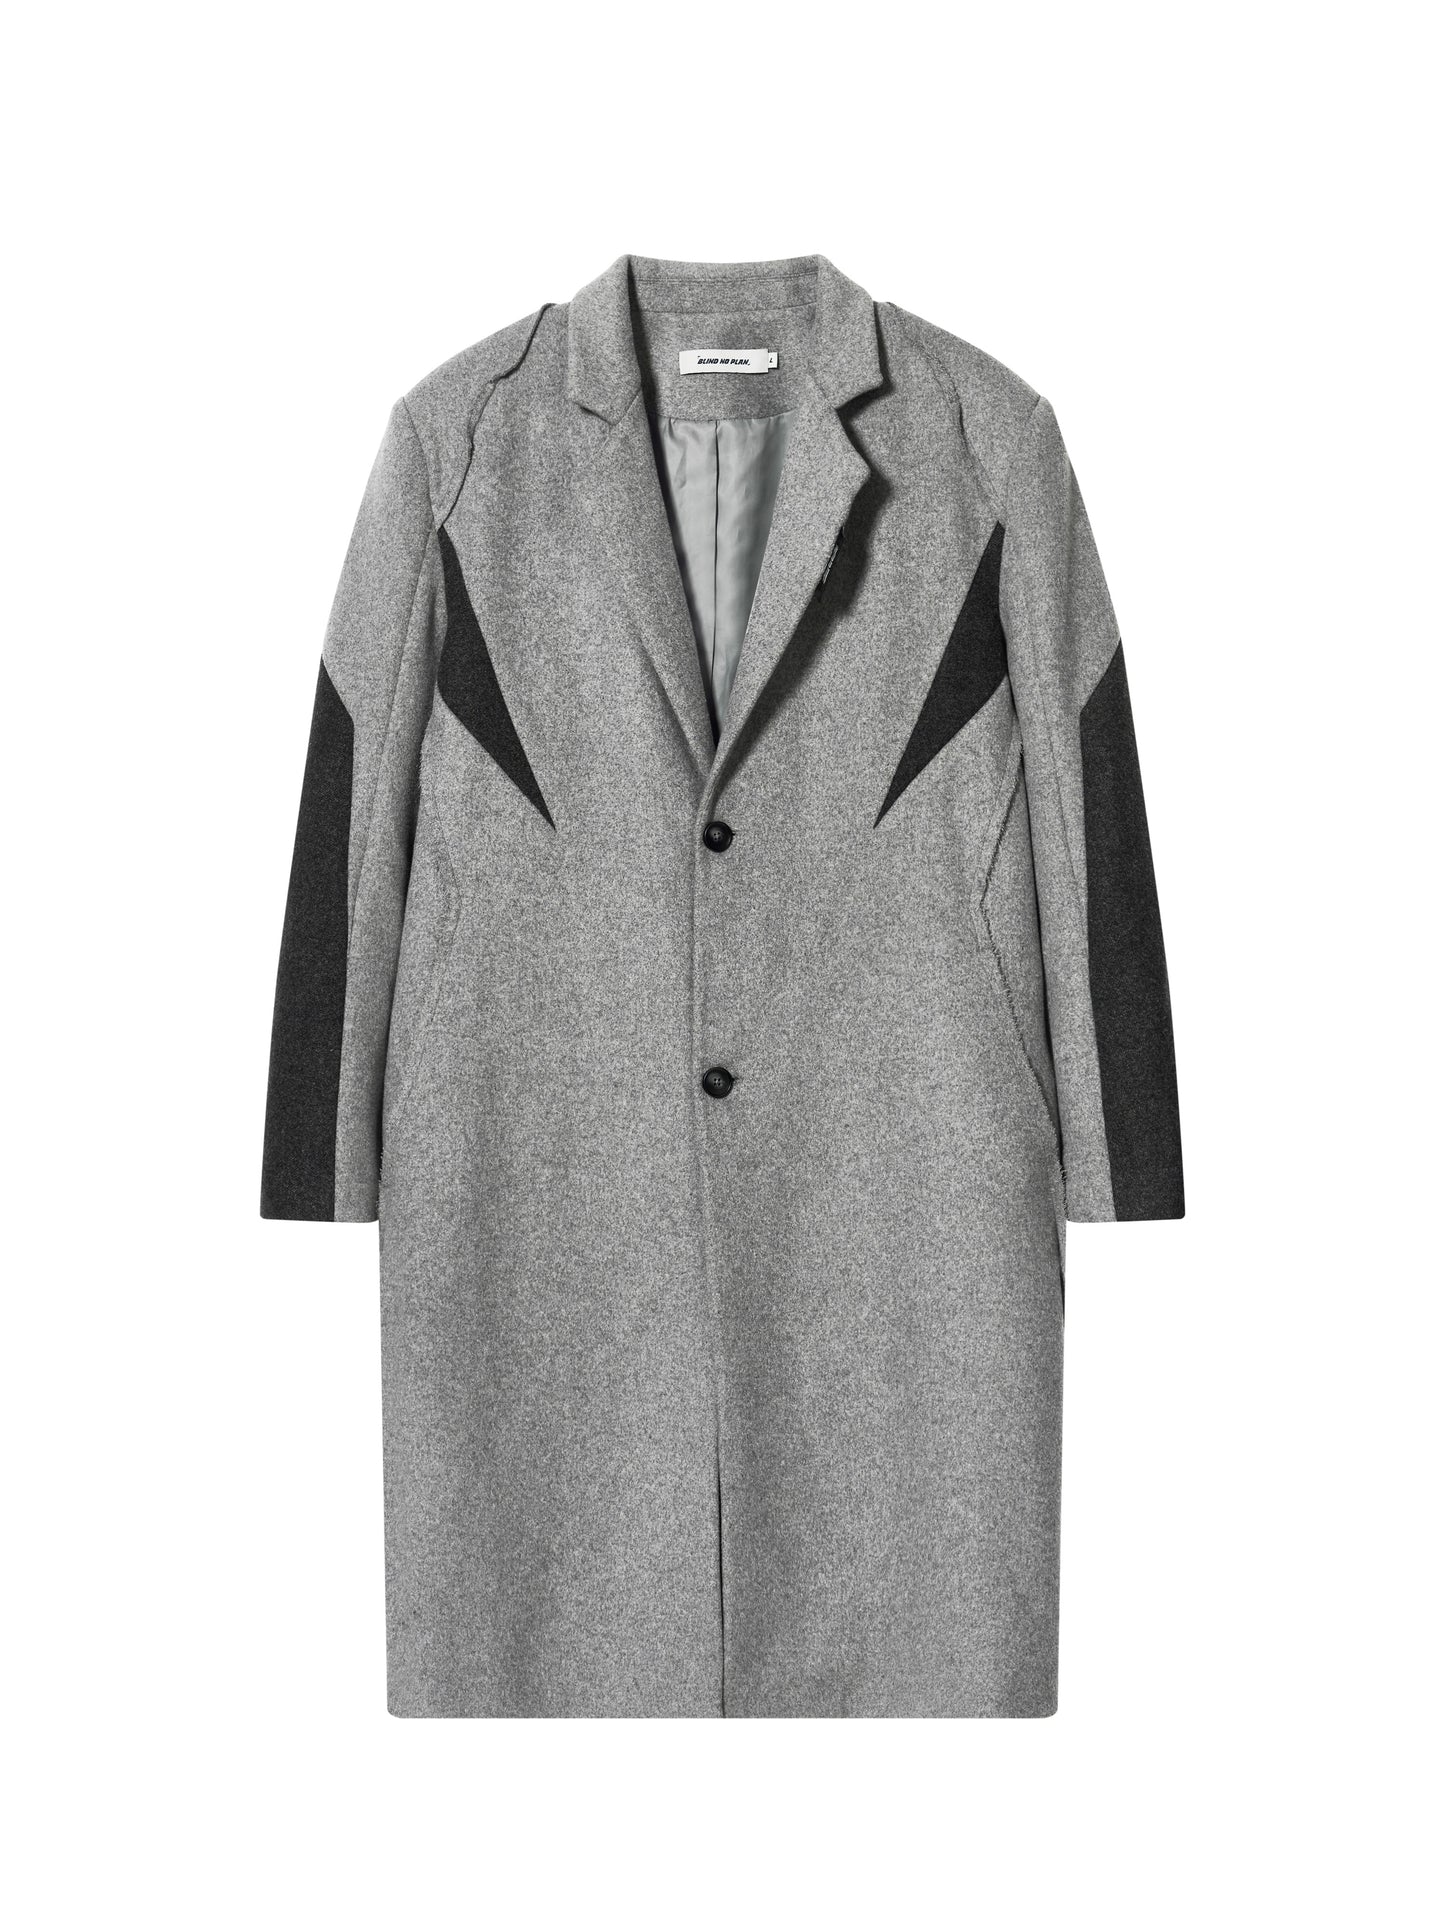 Contrast color stitching mid-length wool coat